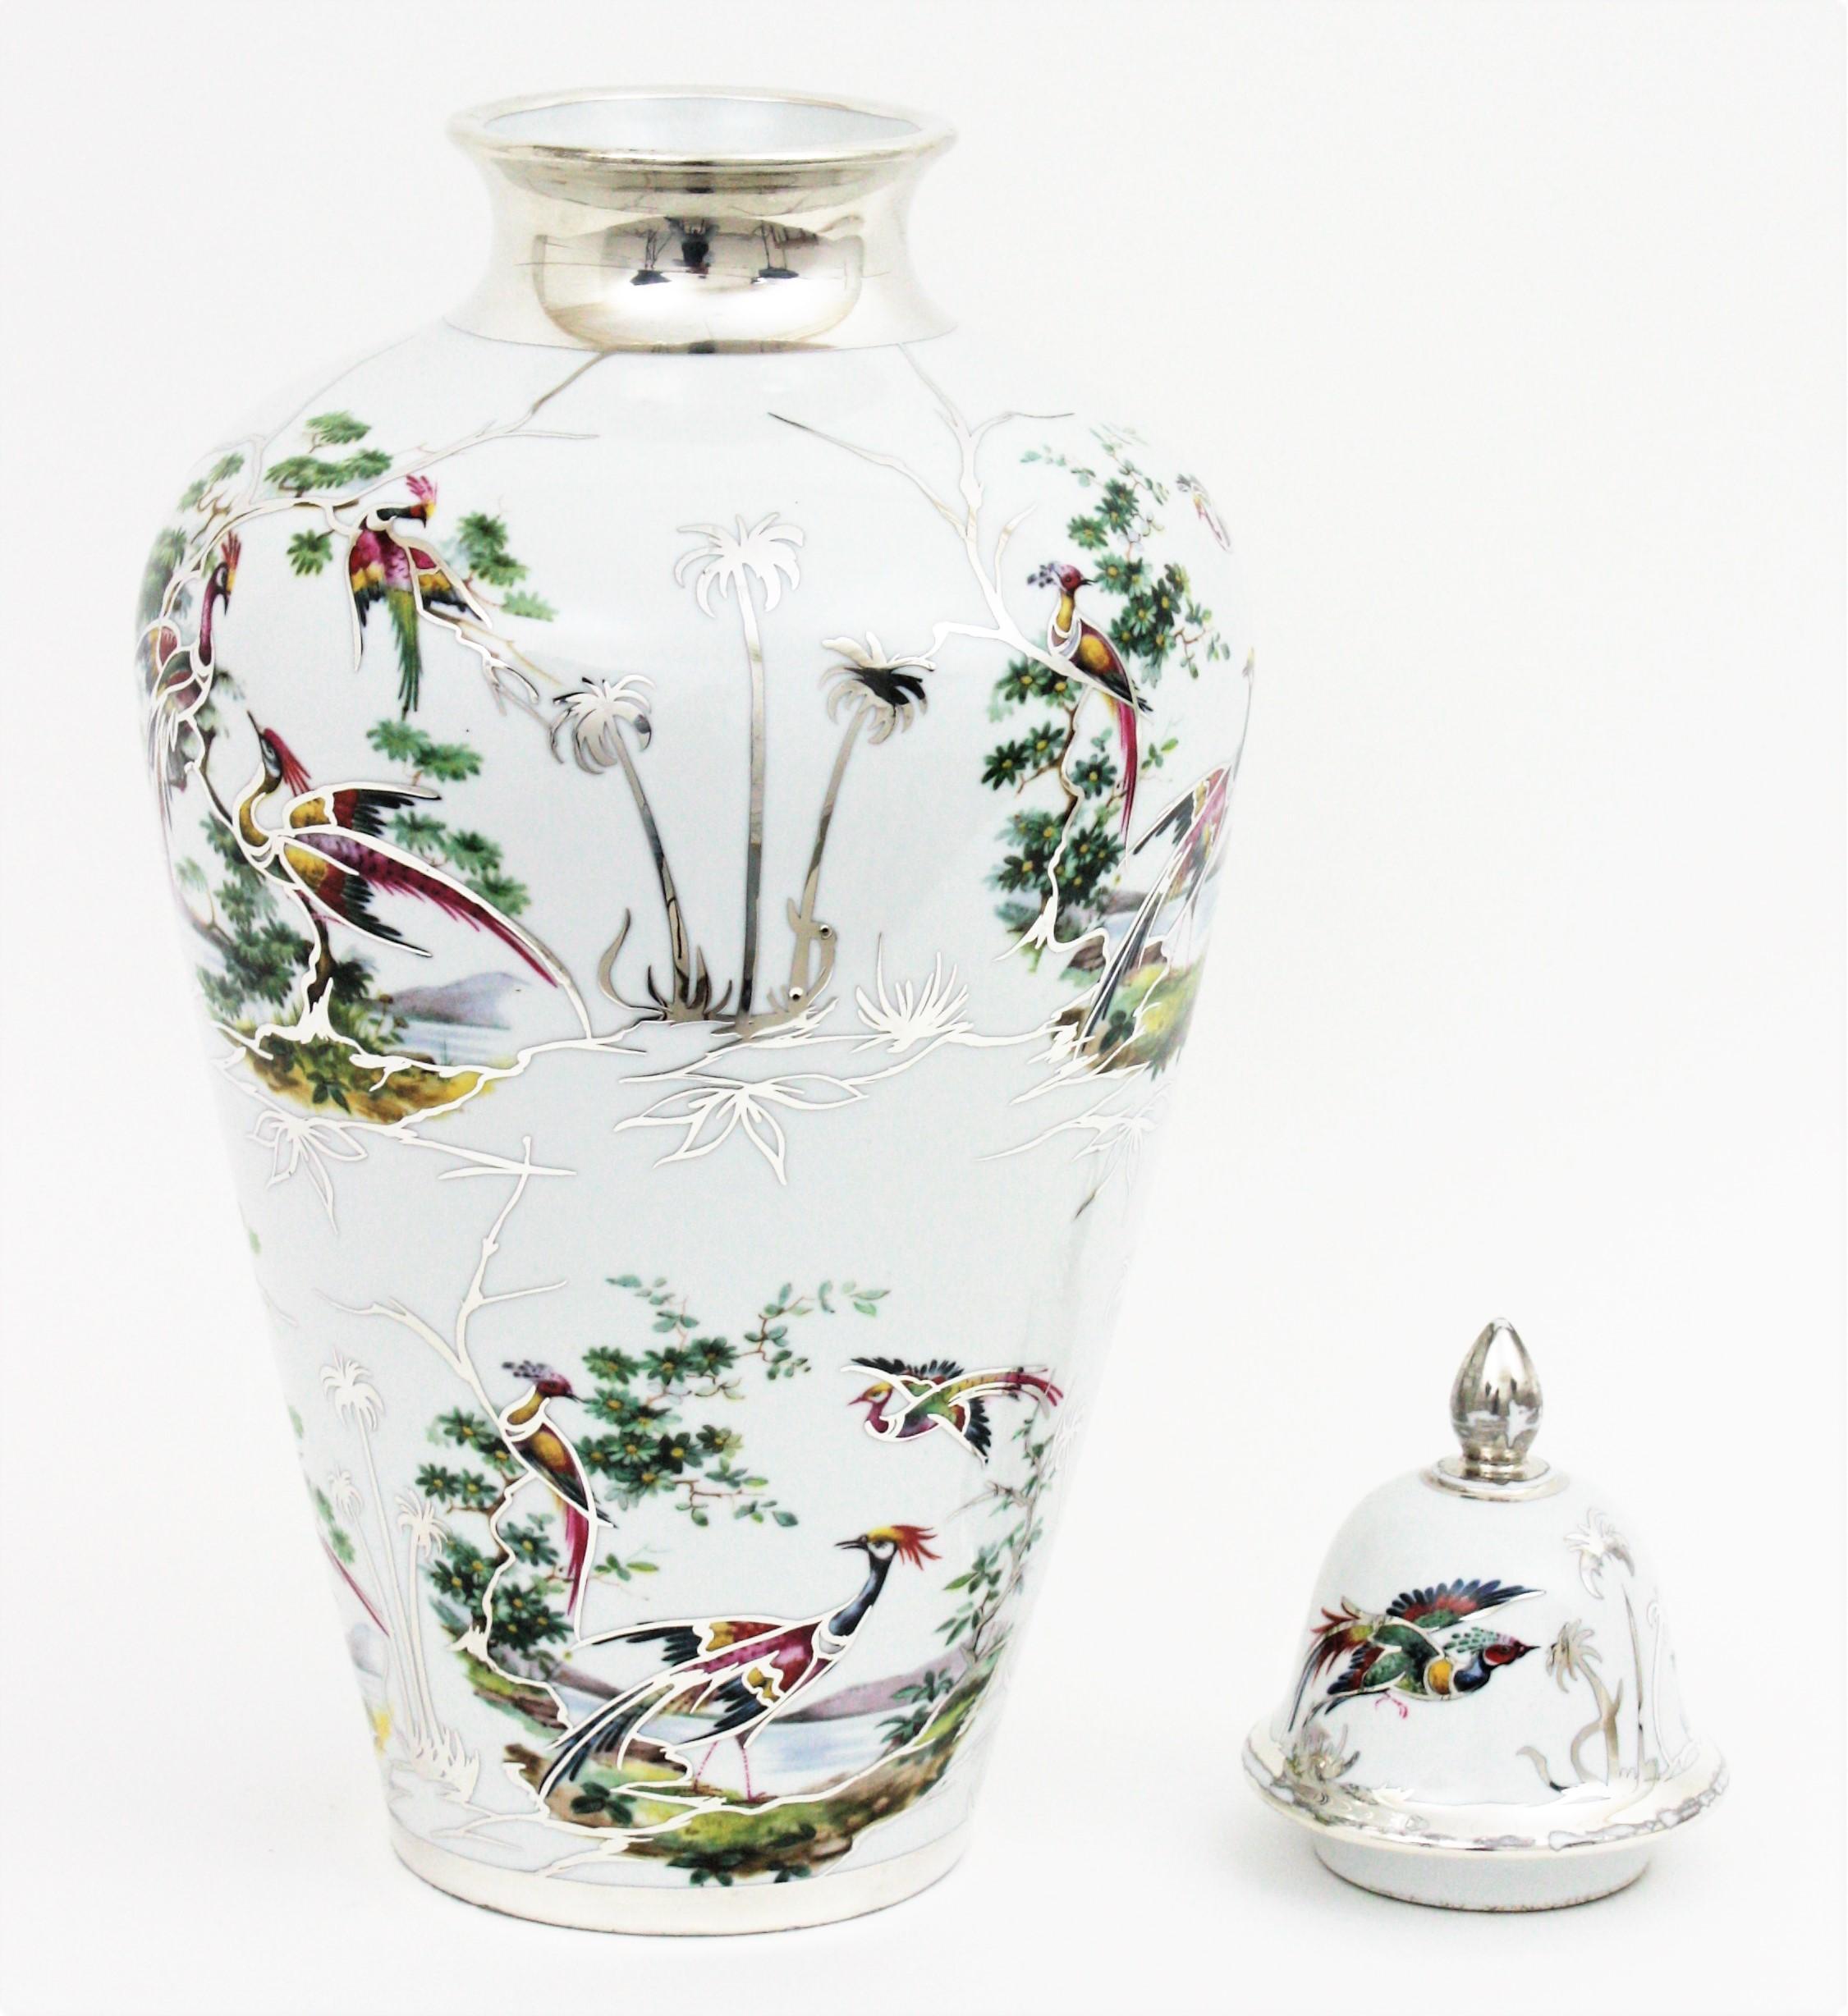 Mid-Century Modern porcelain tall vase with lid, floral and naturalistic motifs, China, 1940s-1950s.
This urn lidded vase features a naturalistic landscape with birds, trees and plants on a white background accented by hand painted silver